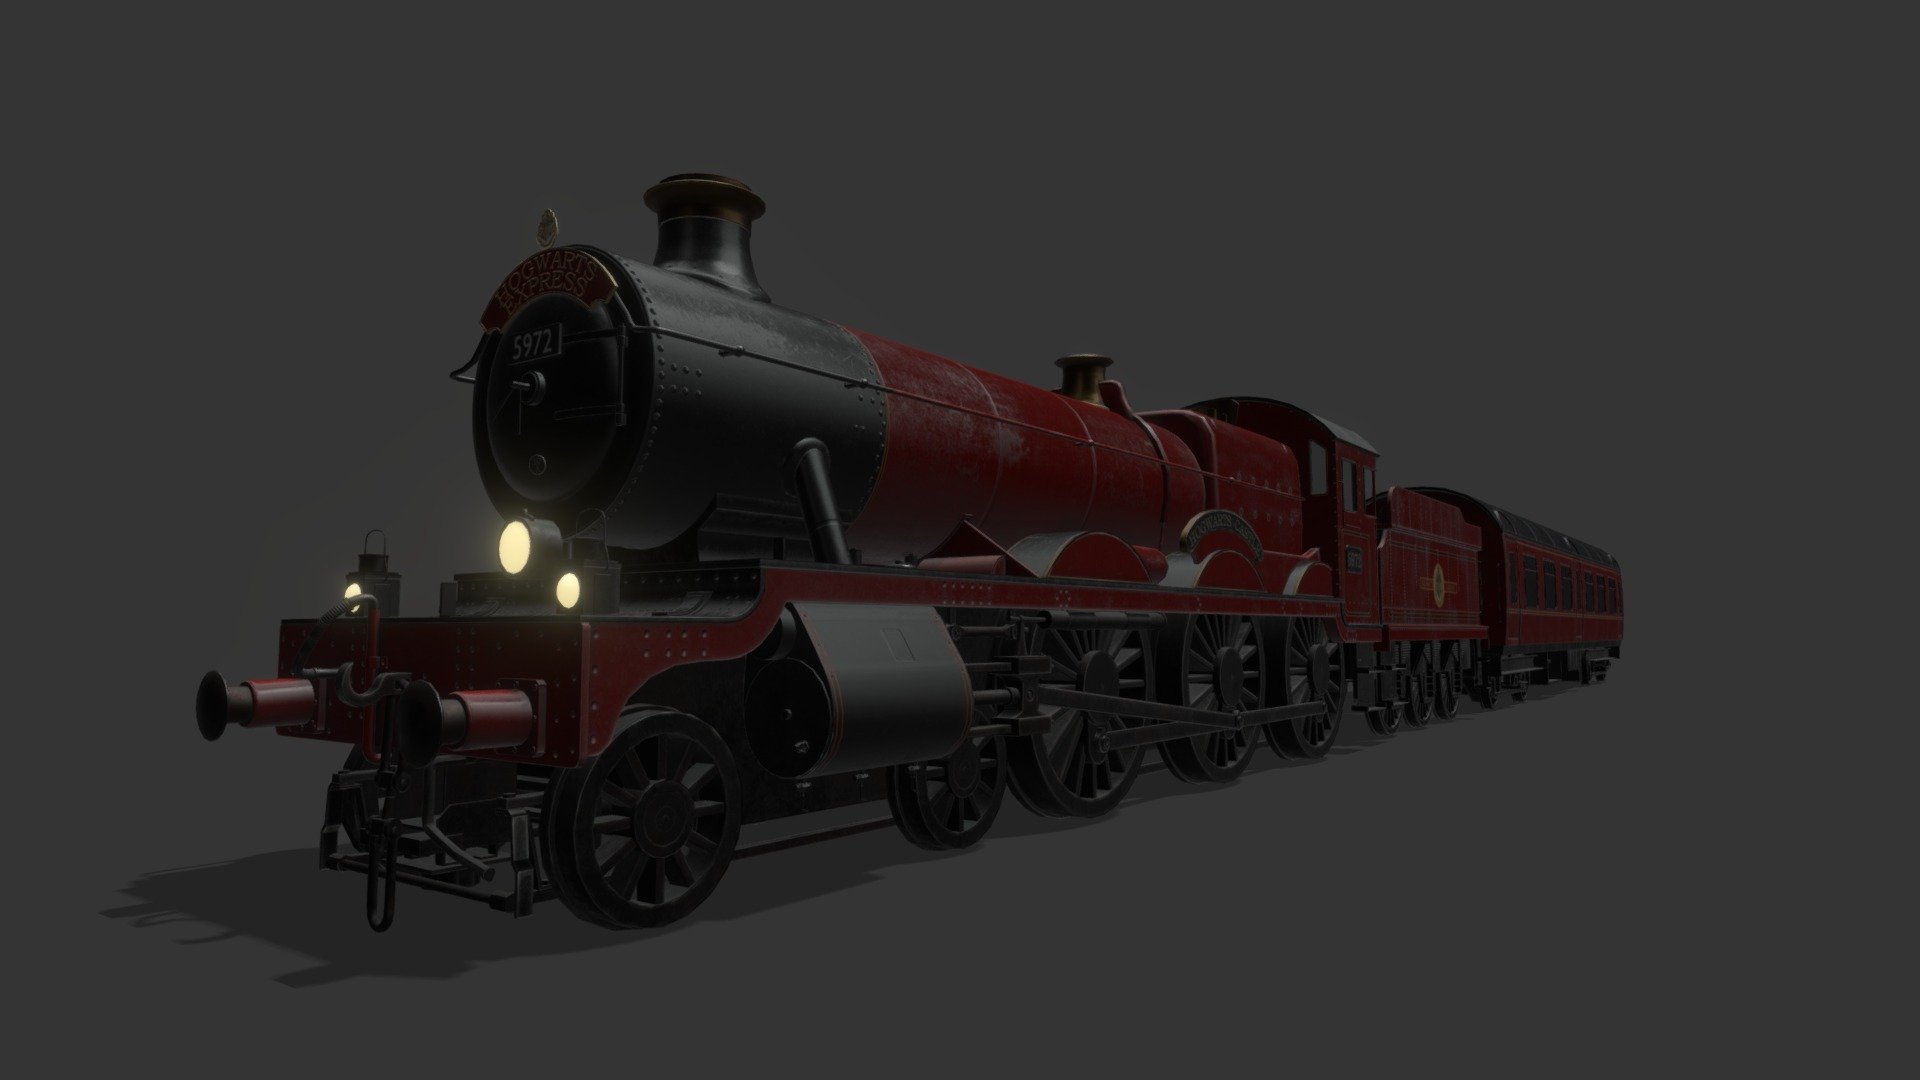 This hogwarts exporess model was created base on the movie and harry potter theme park. 
Check here for my complete microfilm of hogwarts express and 9 and 3/4 platform https://www.artstation.com/artwork/8el9em - HogwartsExpress of Harry Potter - 3D model by Linsong 3d model